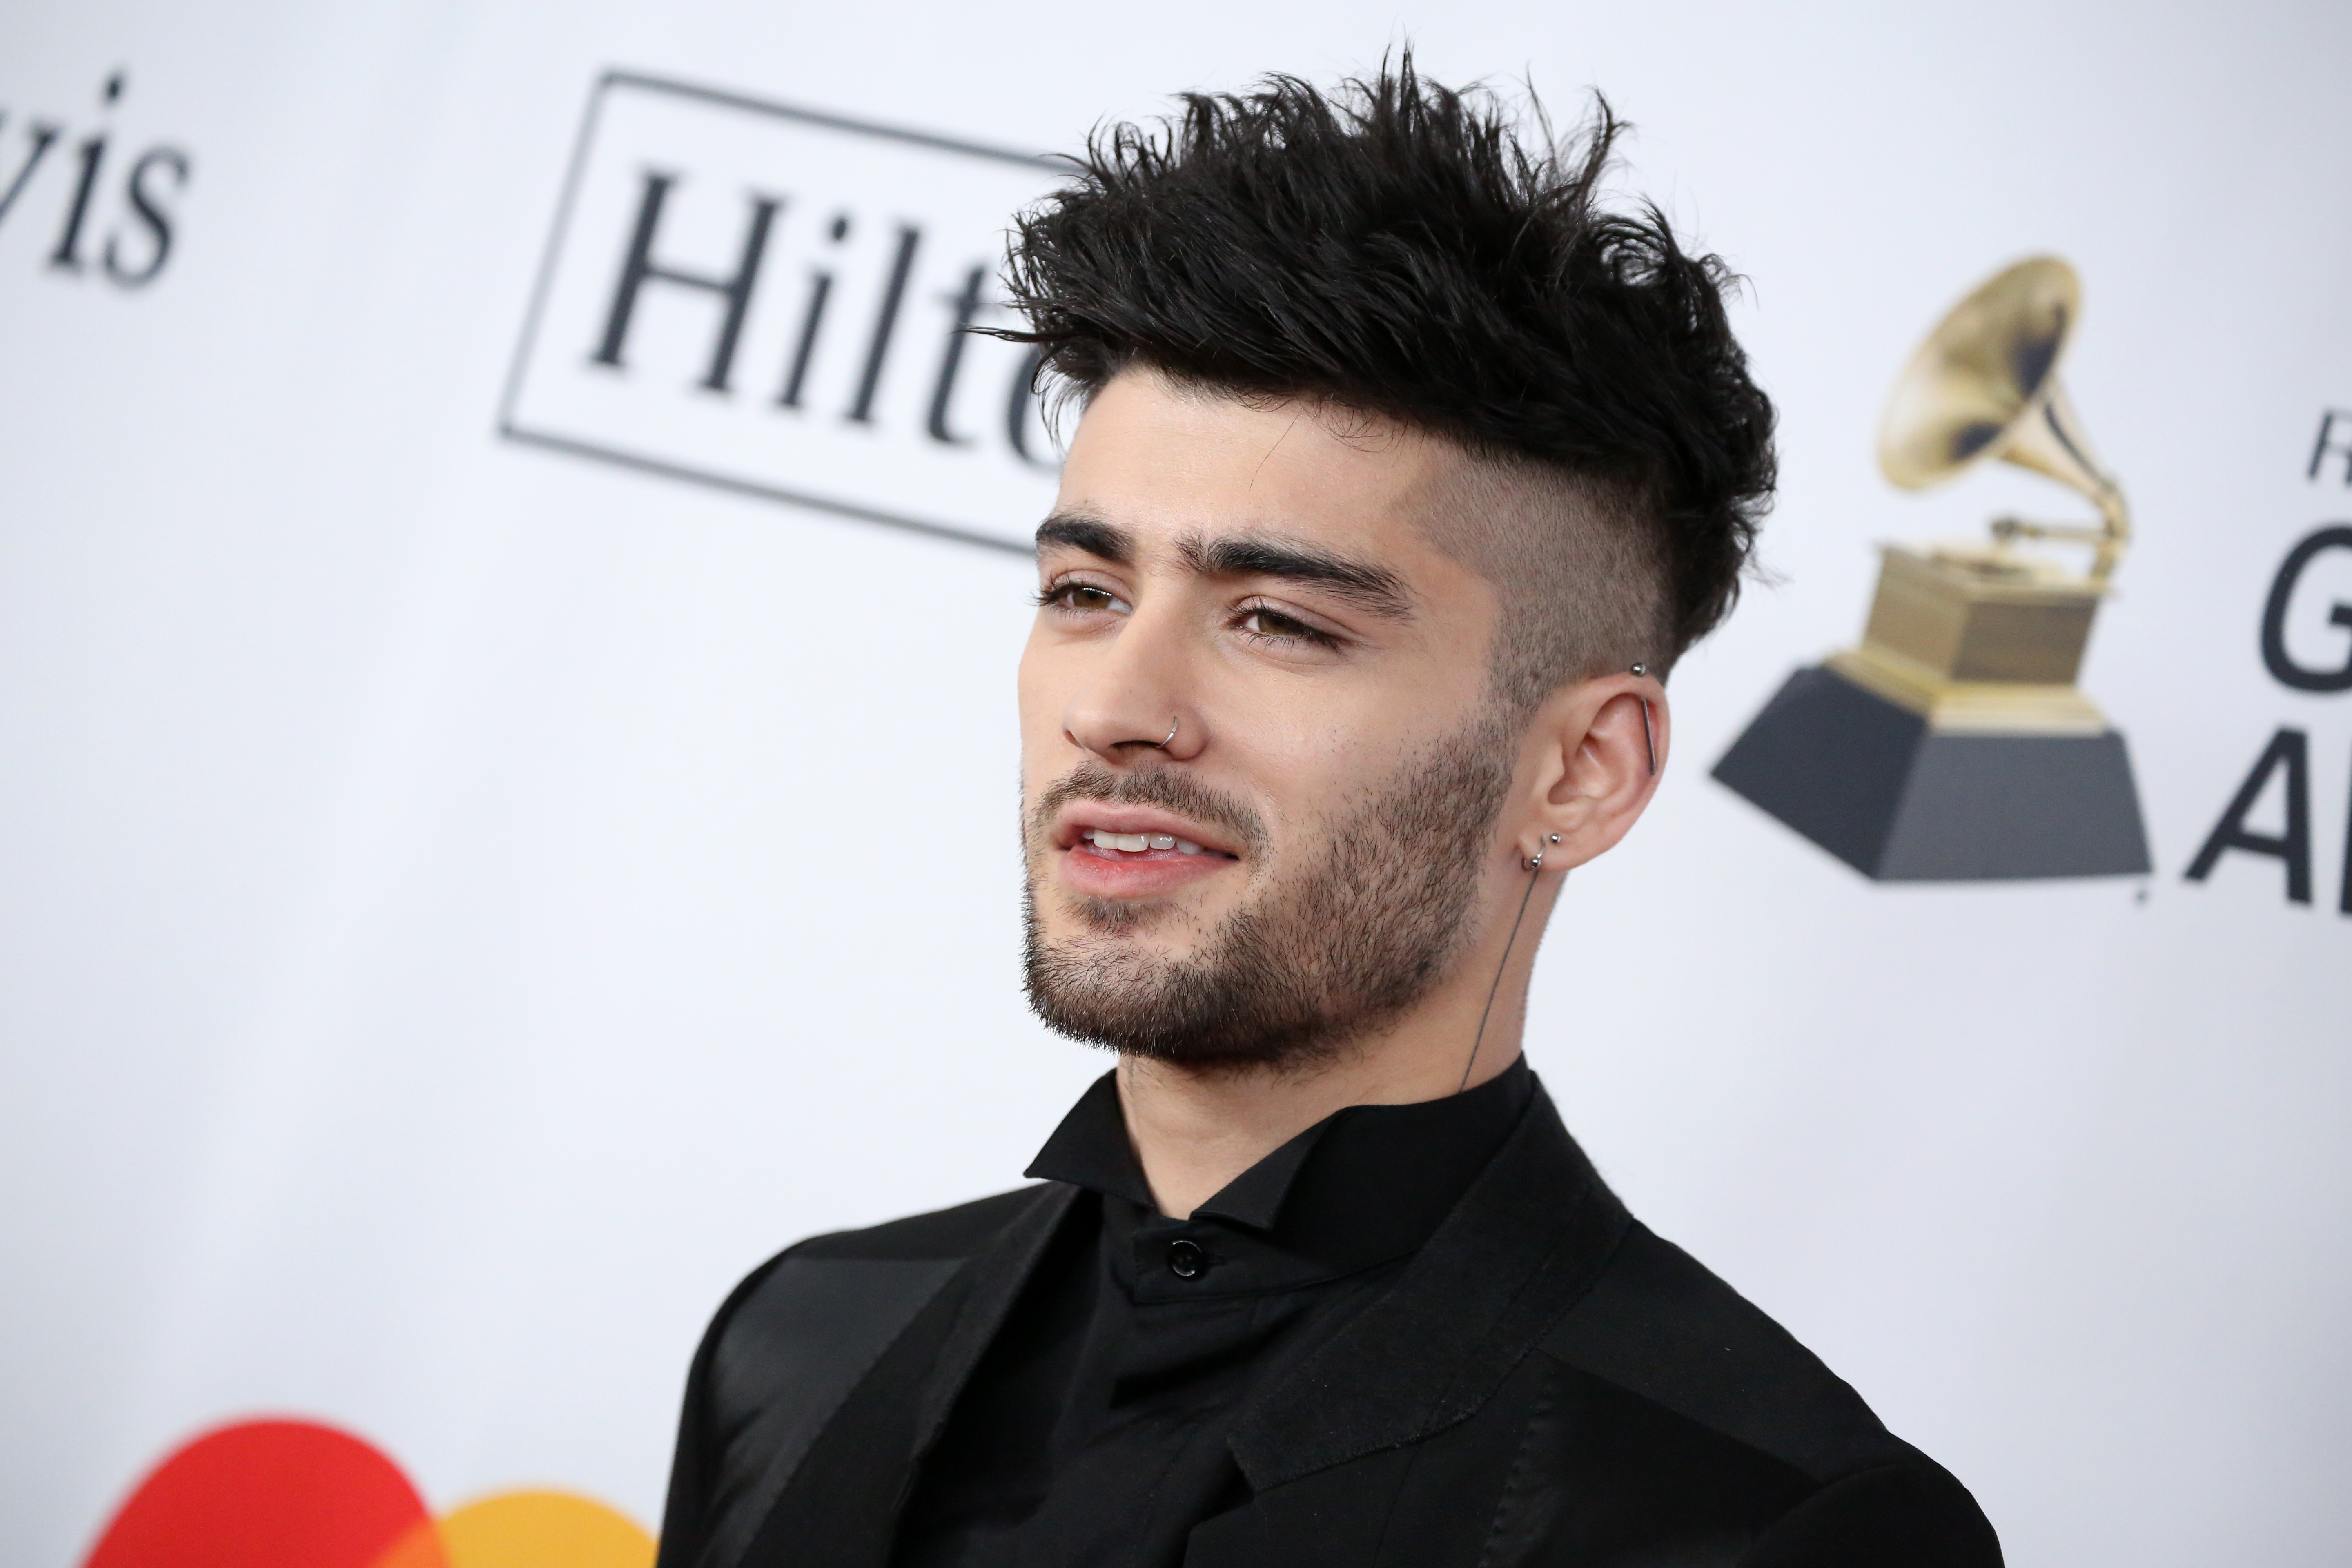 The top 7 songs by Zayn Malik of all time ranked